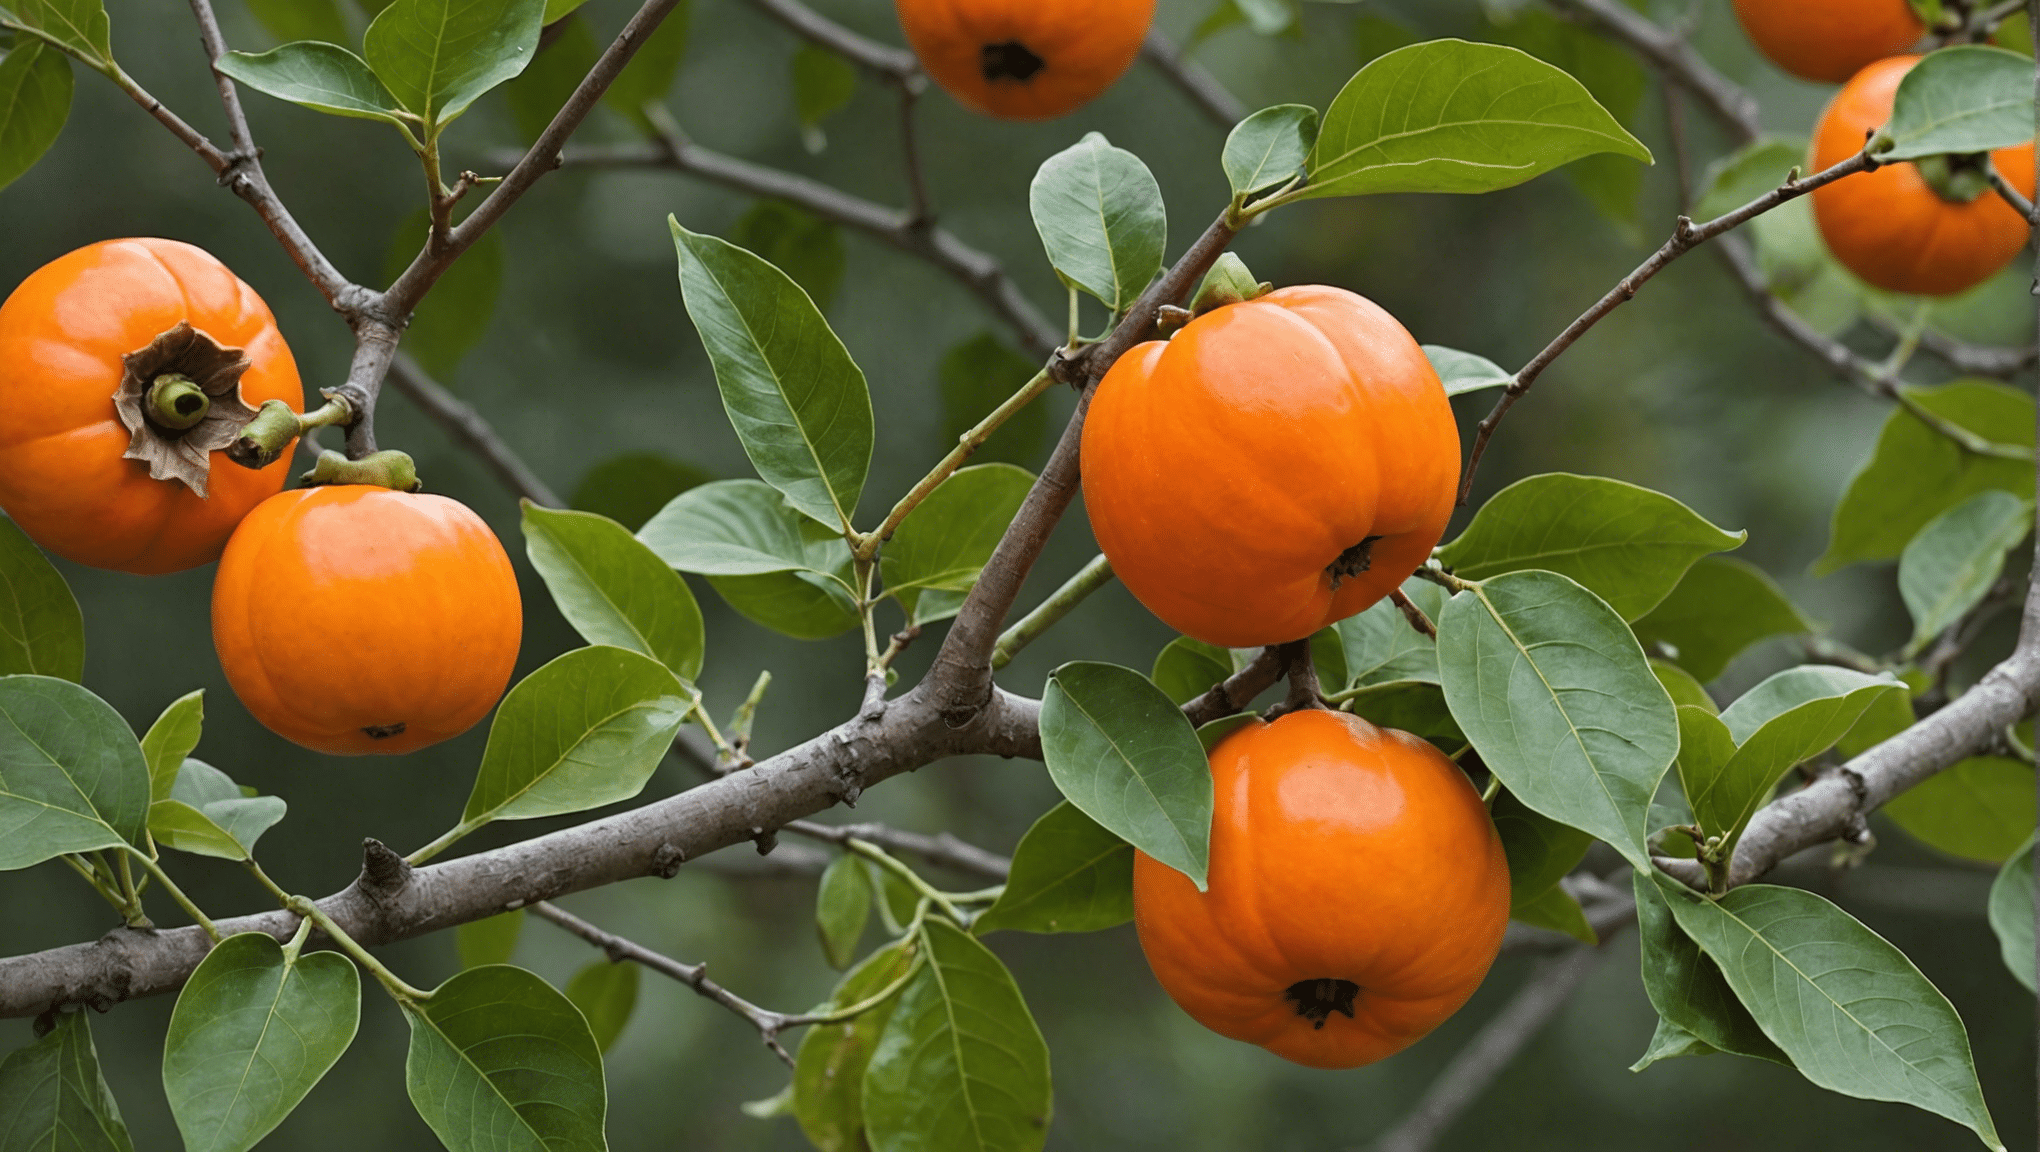 discover the fascinating tradition of using persimmon seeds to predict the weather and learn how this ancient practice is still used today for weather forecasting.